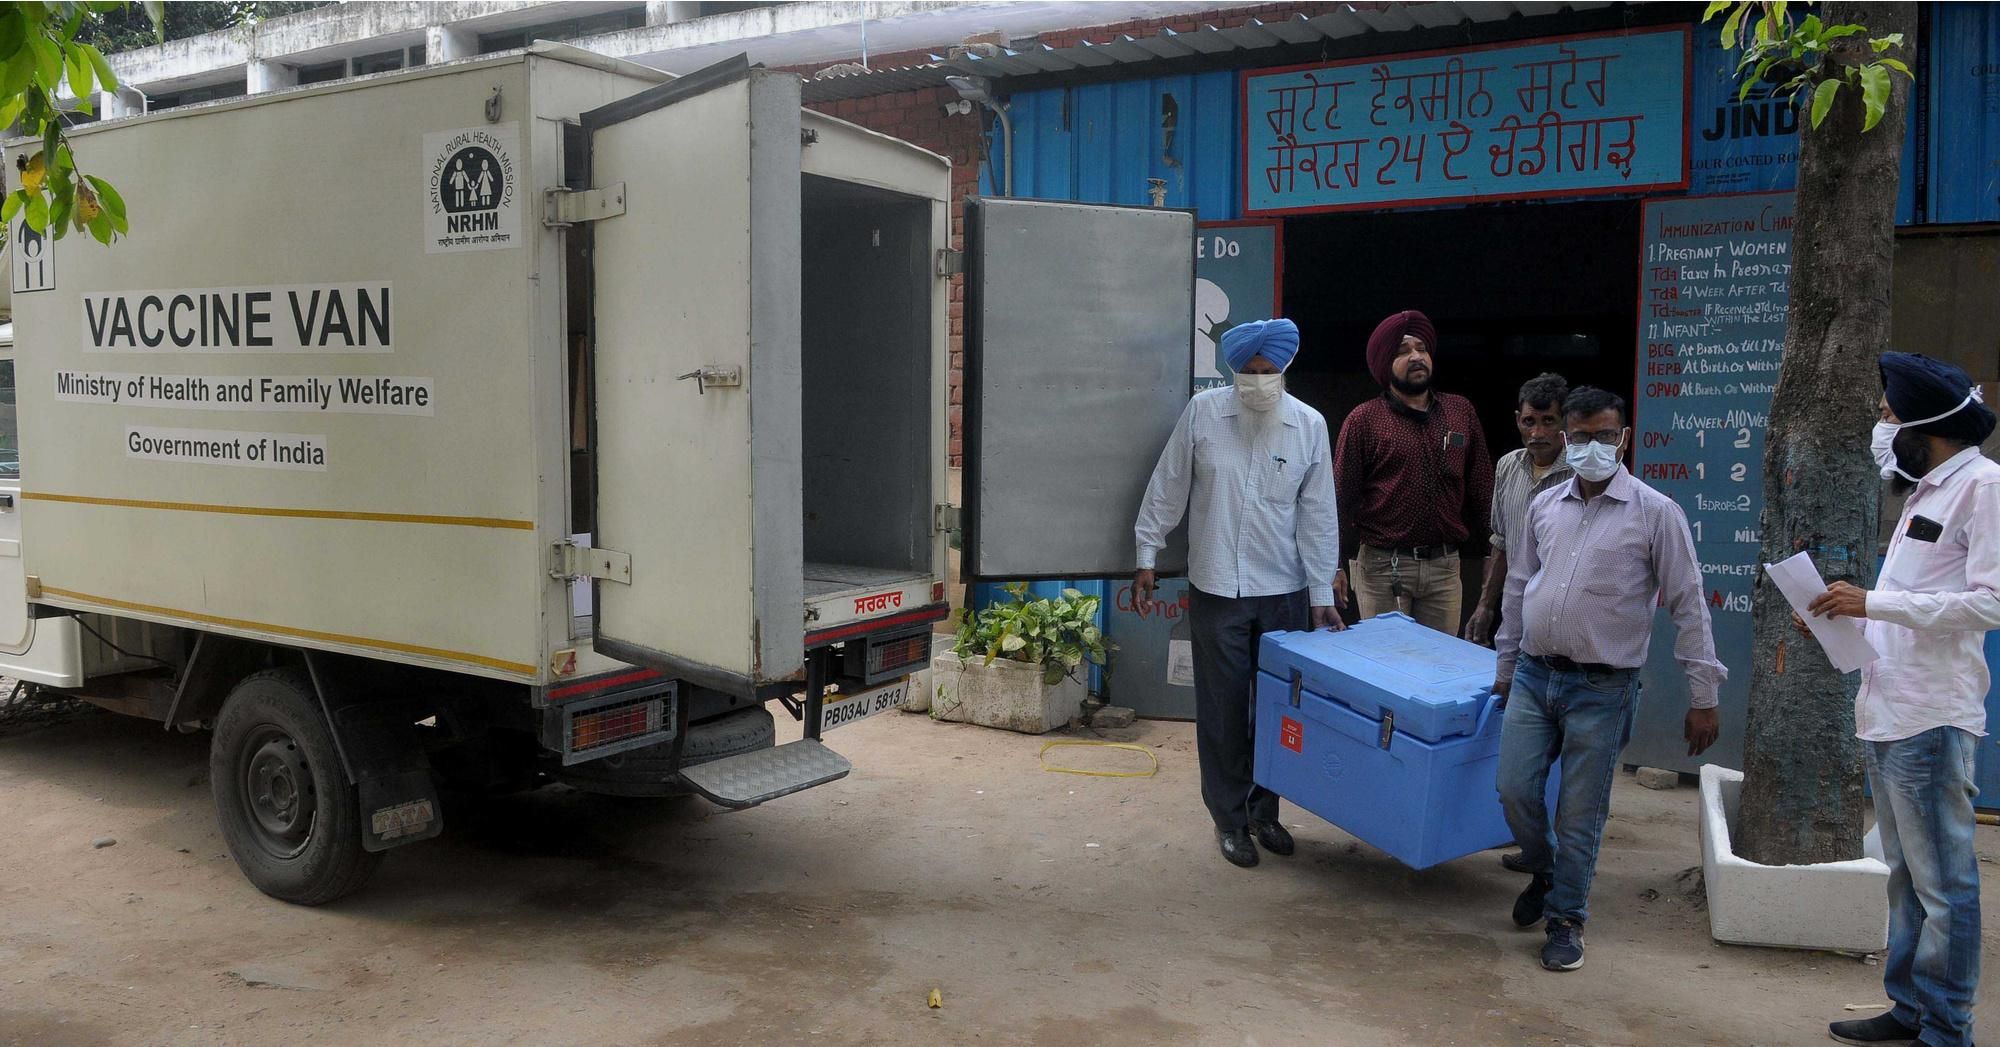 Workers handle Covid-19 vaccines at a distribution center in Chandigarh, India on May 4, 2021. (Photo: Ravi Kumar/Hindustan Times via Getty Images) 